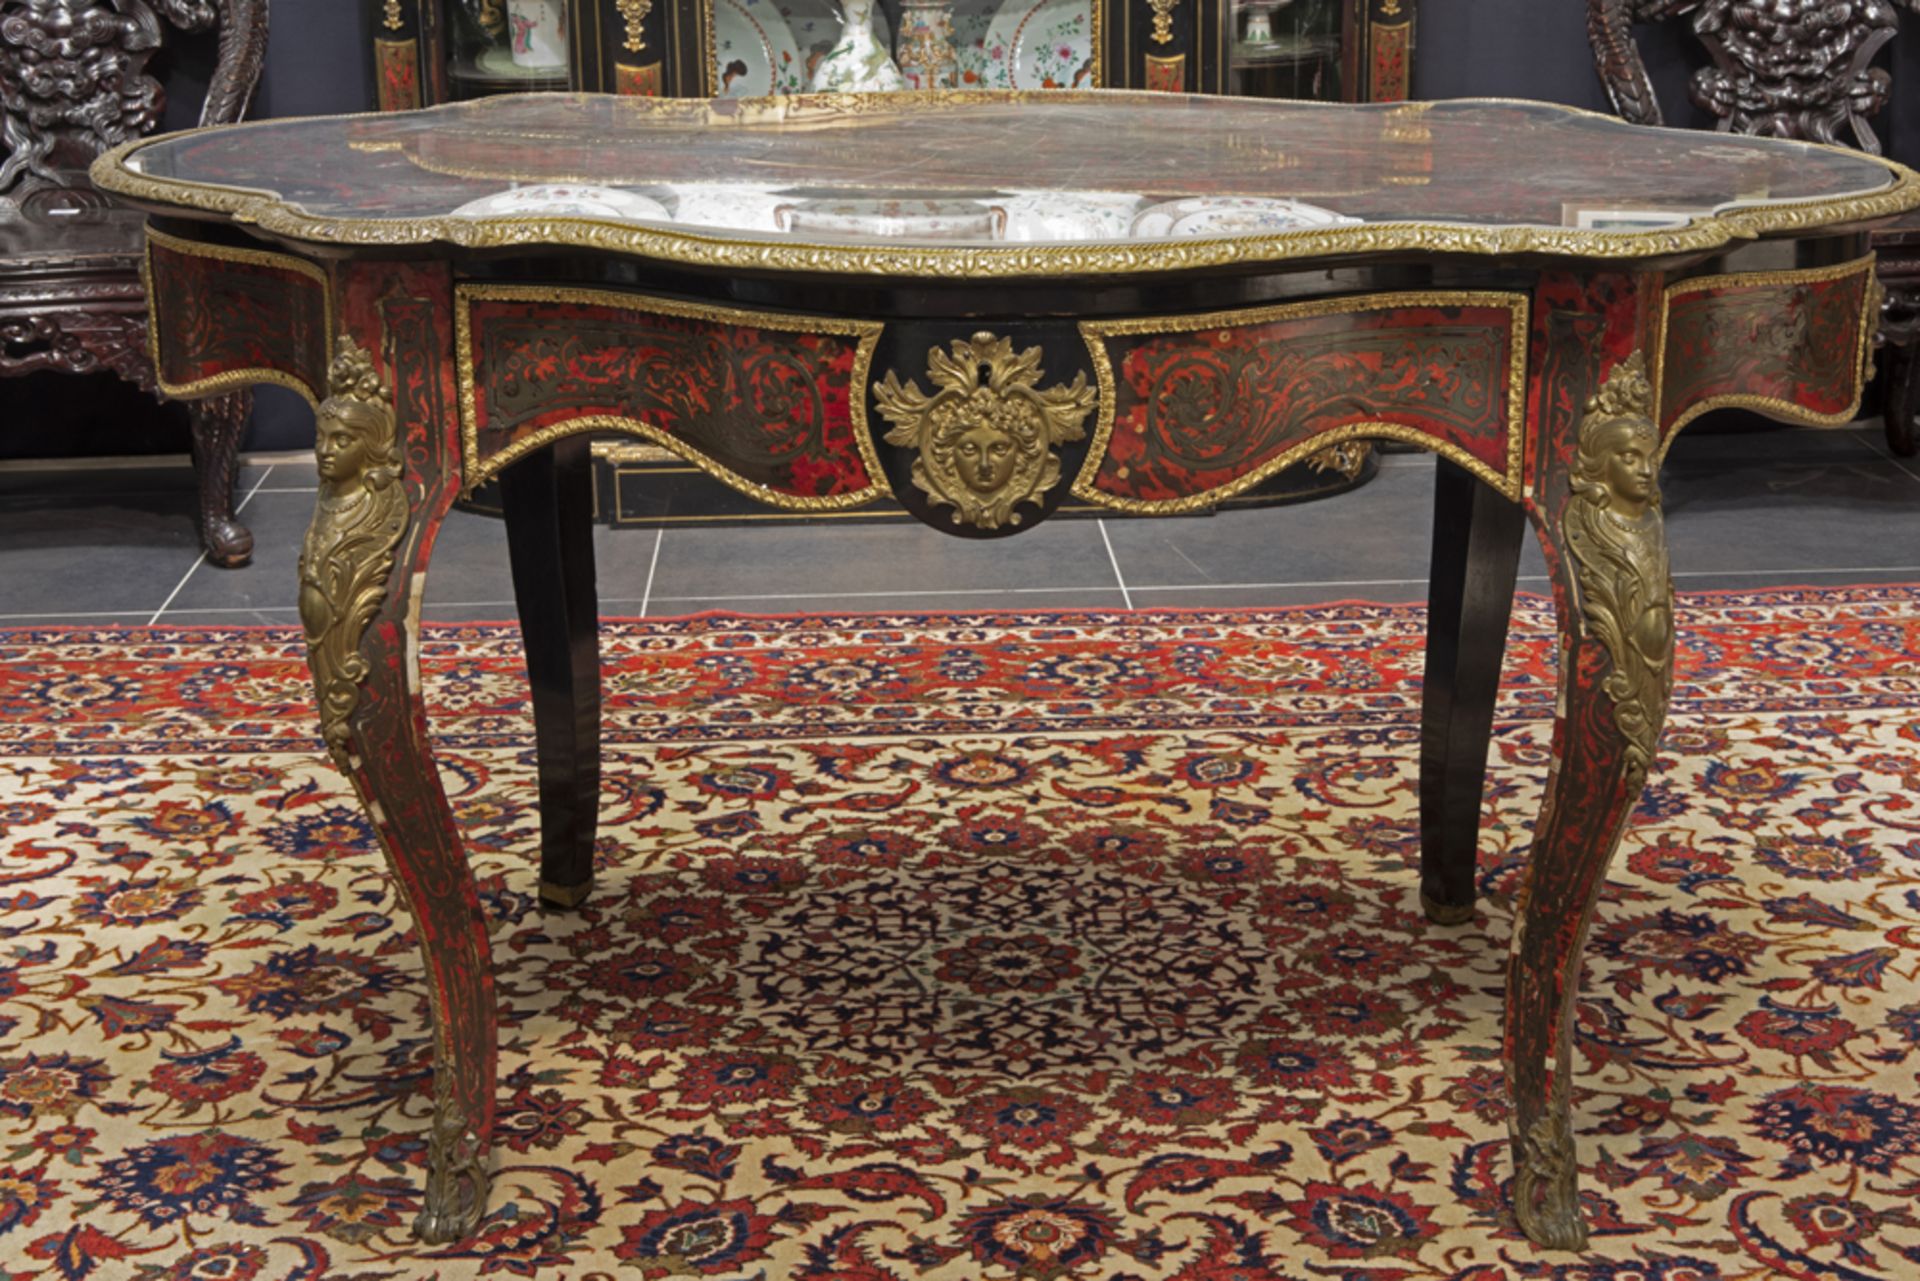 19th Cent. French Napoleon III table with drawer in "Boulle" with gilded bronze mountings ||